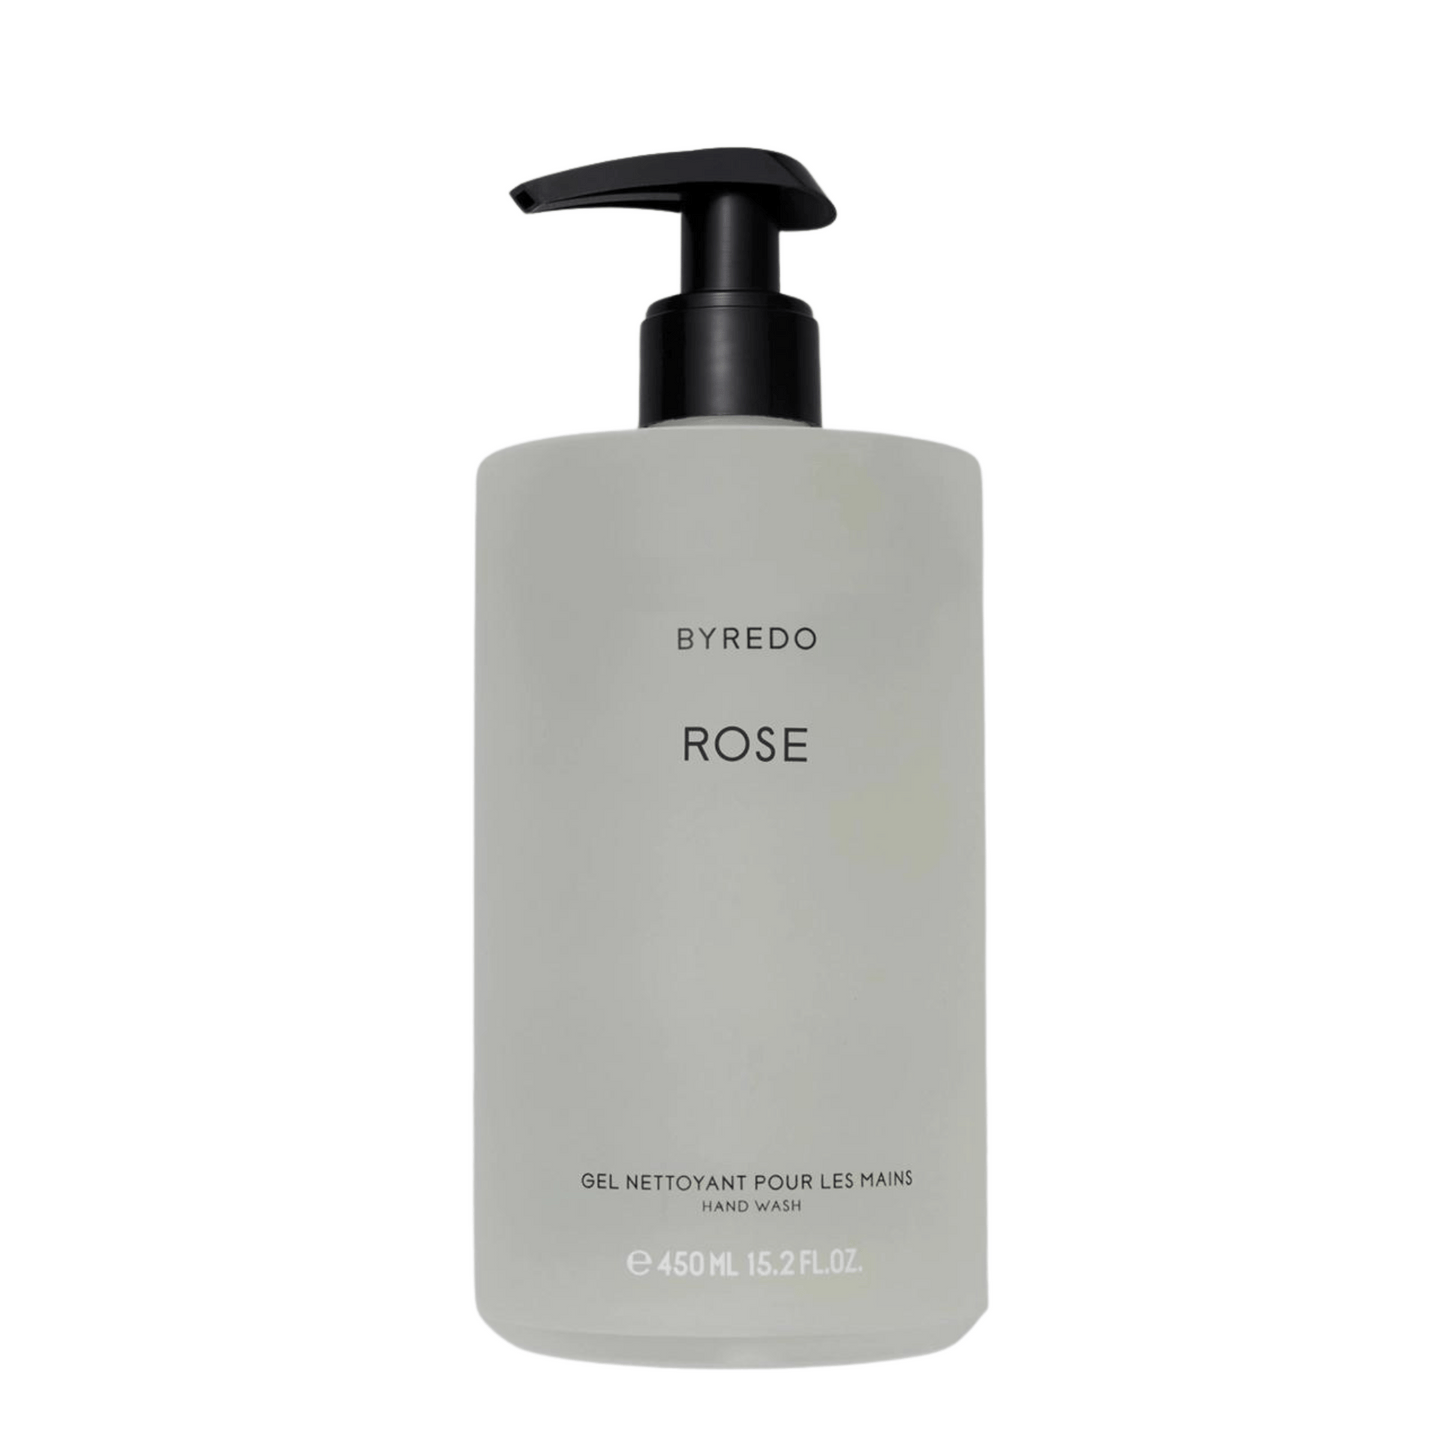 Primary Image of Rose Hand Wash